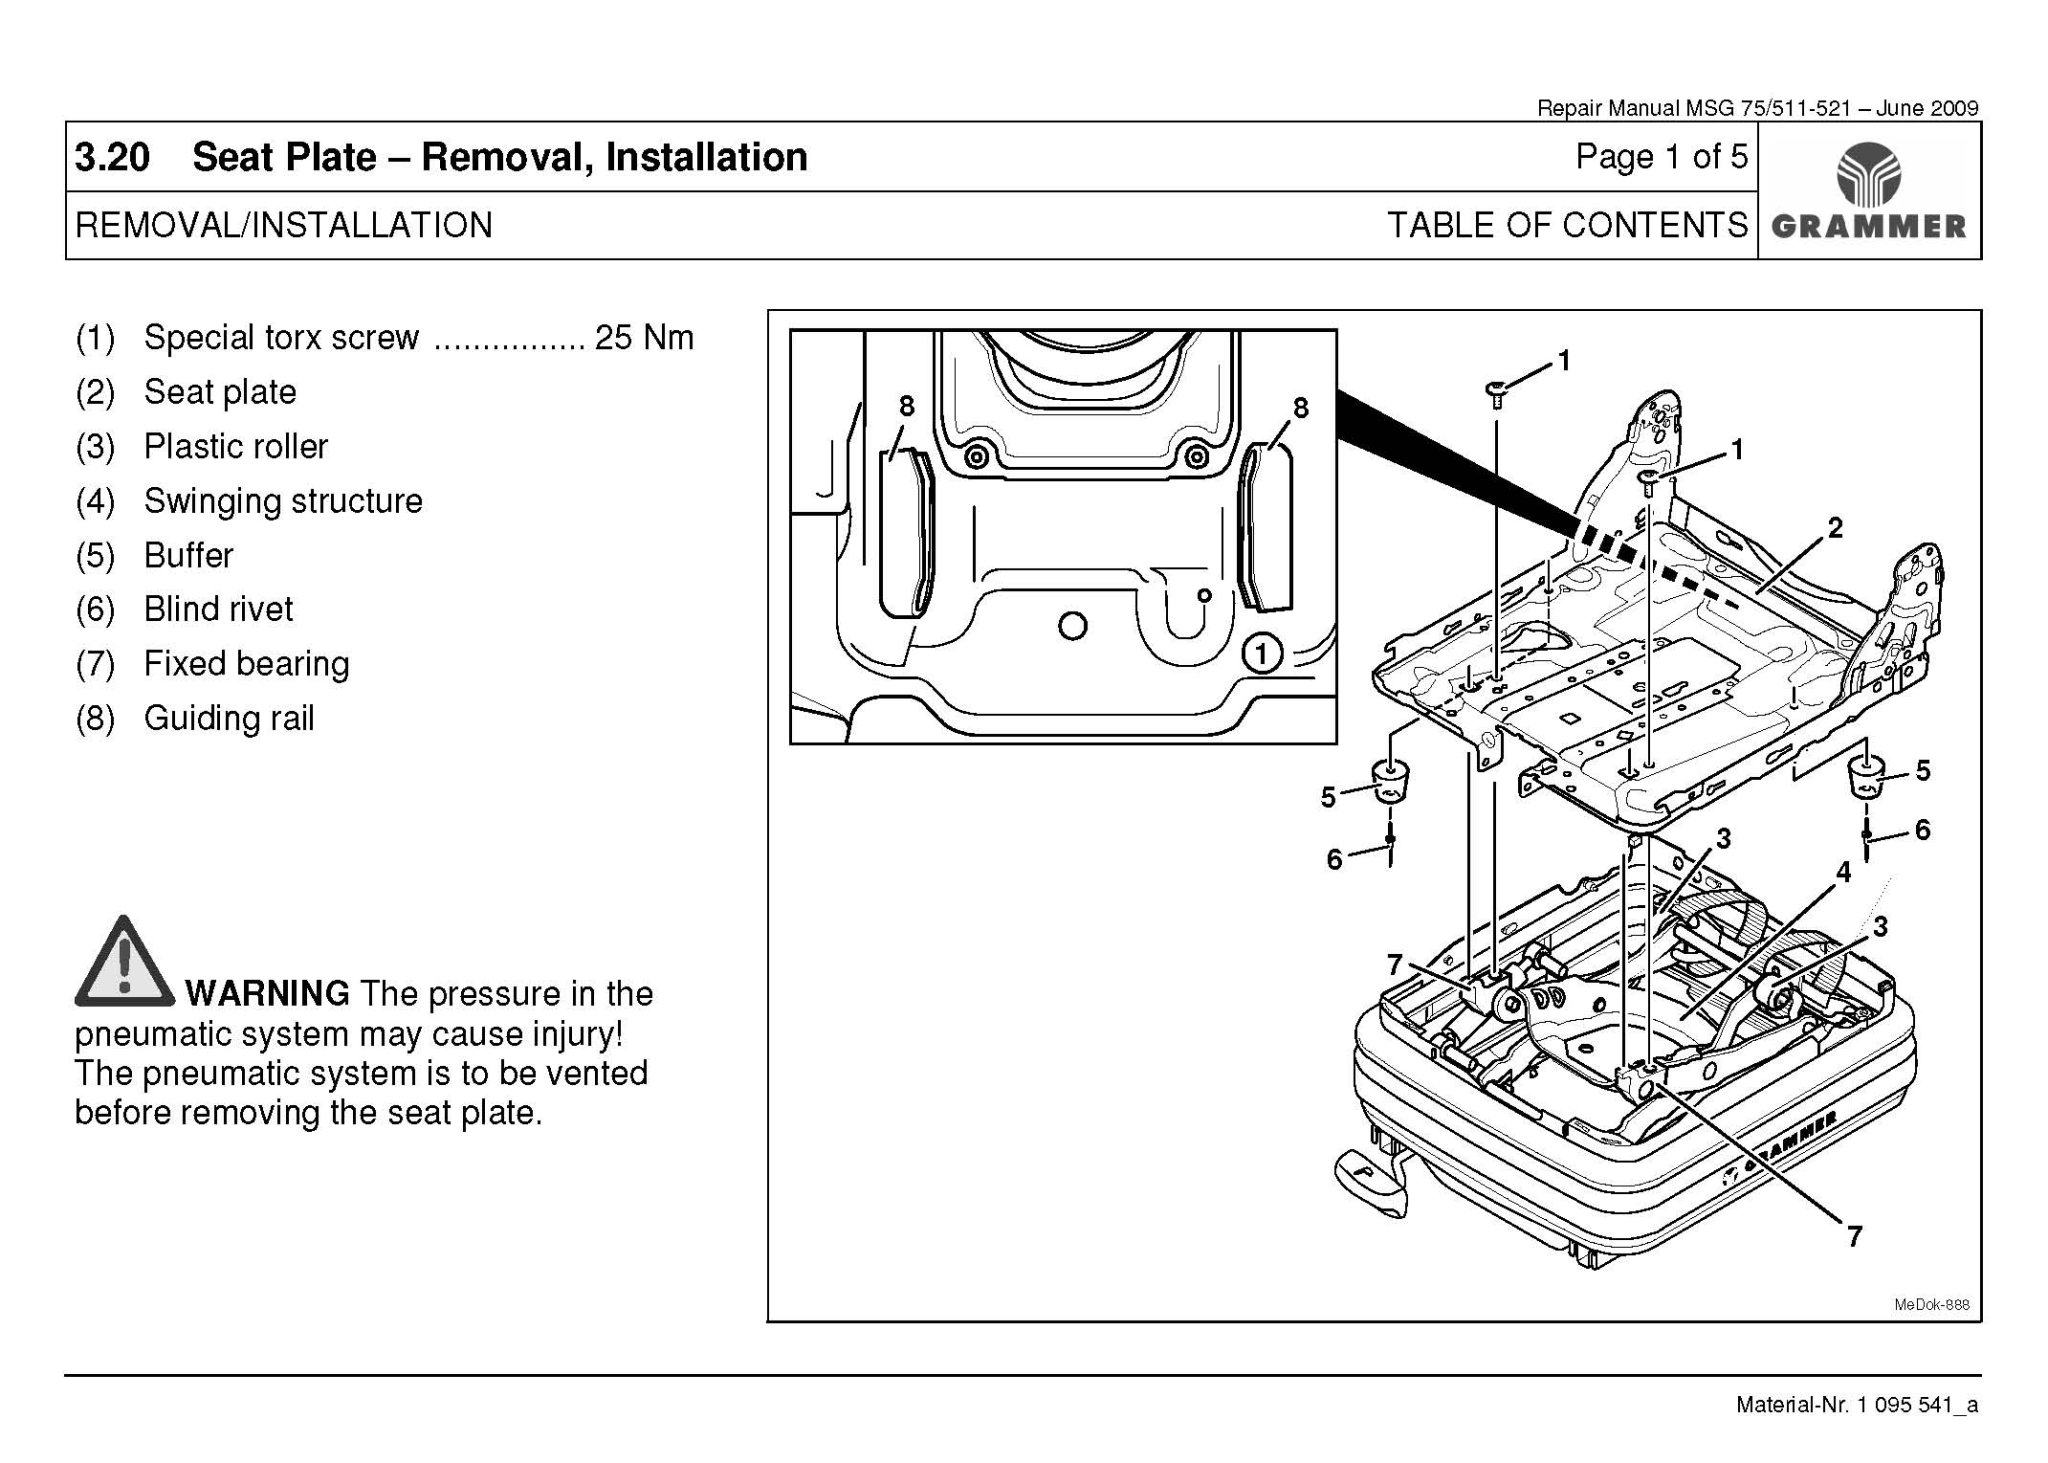 Pages from Repair_Manual_MSG75.jpg